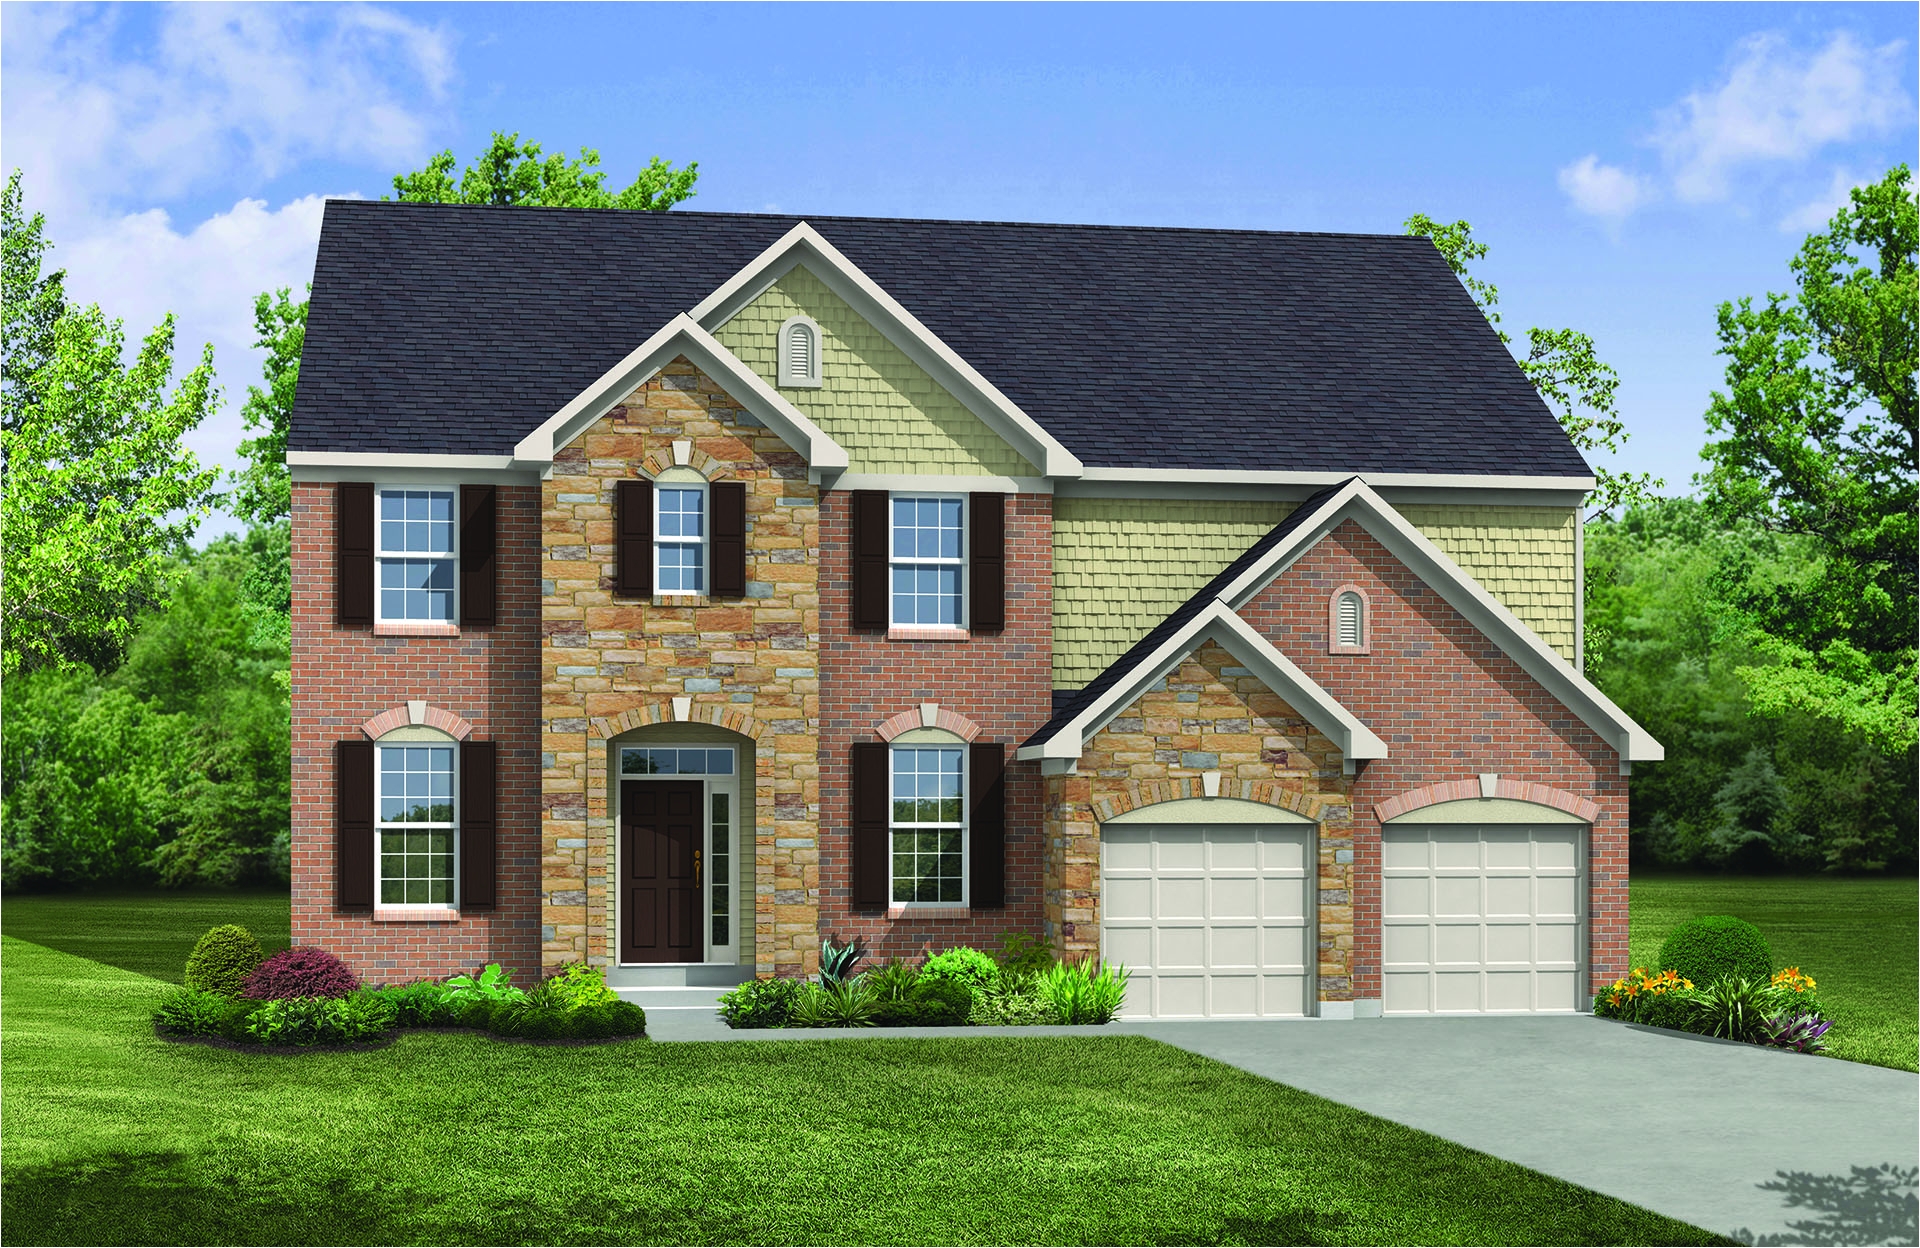 new construction homes plans in damascus md 1541 homes newhomesource